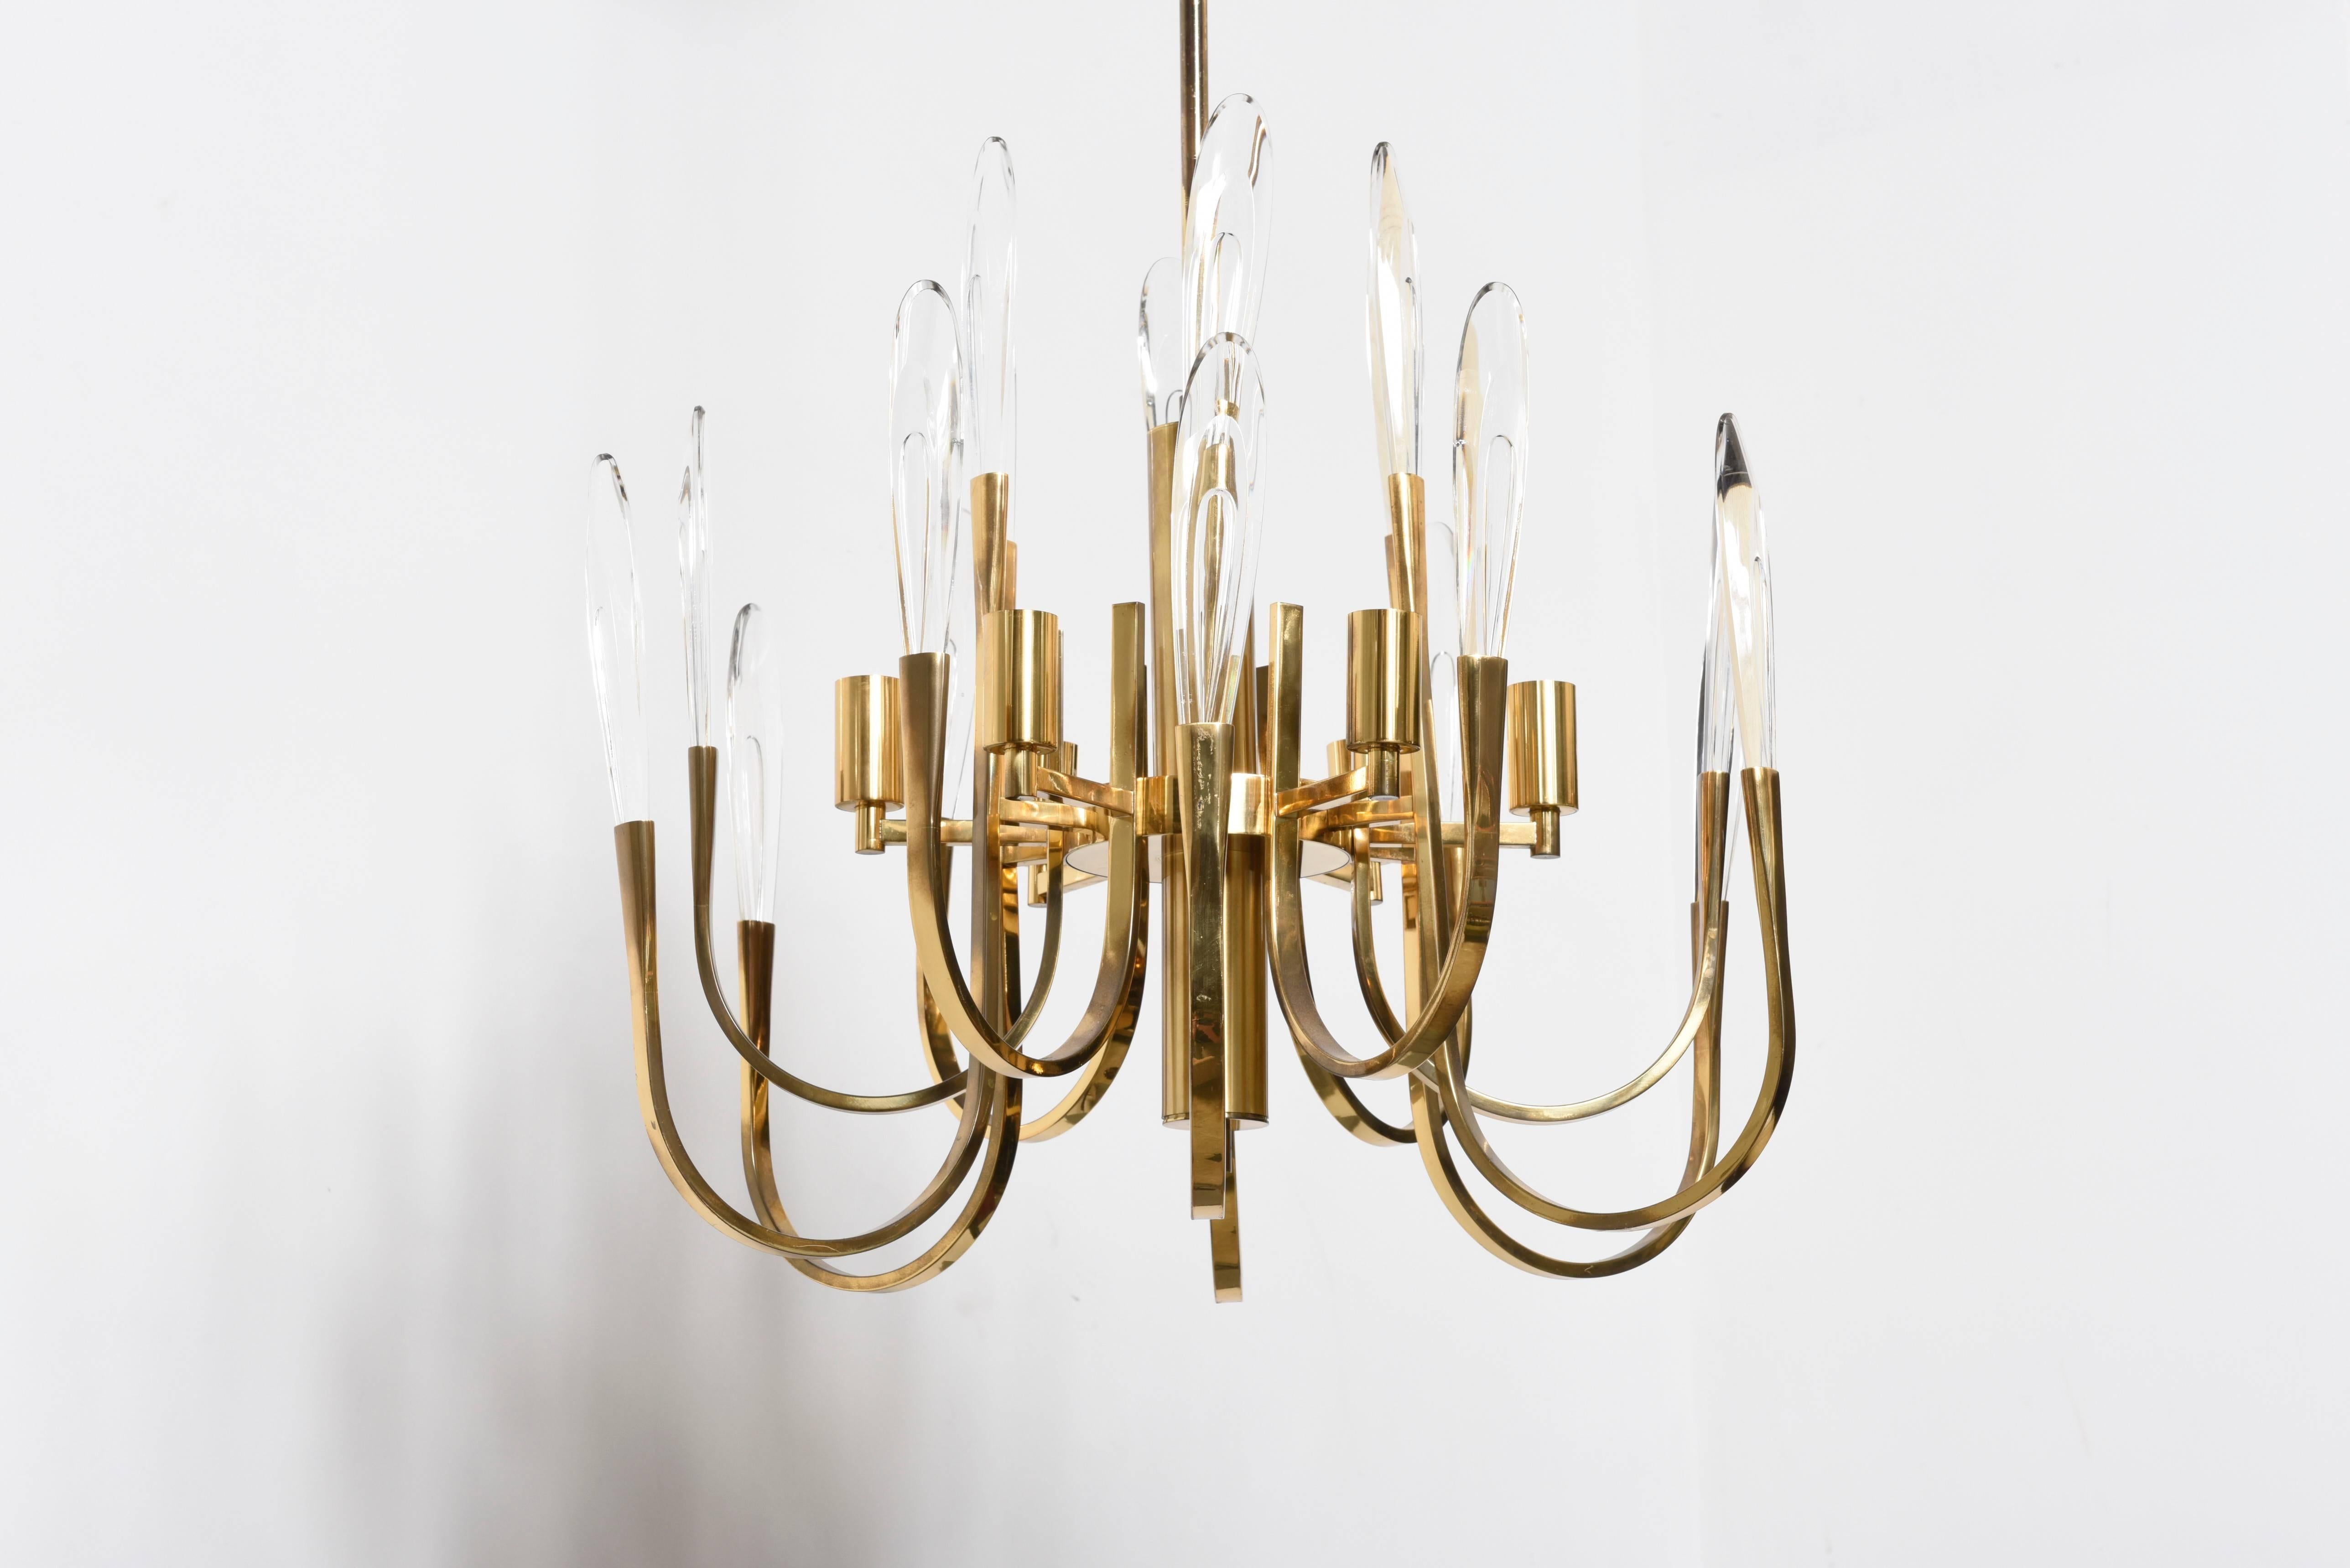 This midcentury brass chandelier was designed by Geatano Sciolari in the 1960s. 
It is constructed of two tiers brass arms with faceted crystal and holds six smaller light bulbs. 

Today the Sciolari impressive lamps and sculptures lighting can